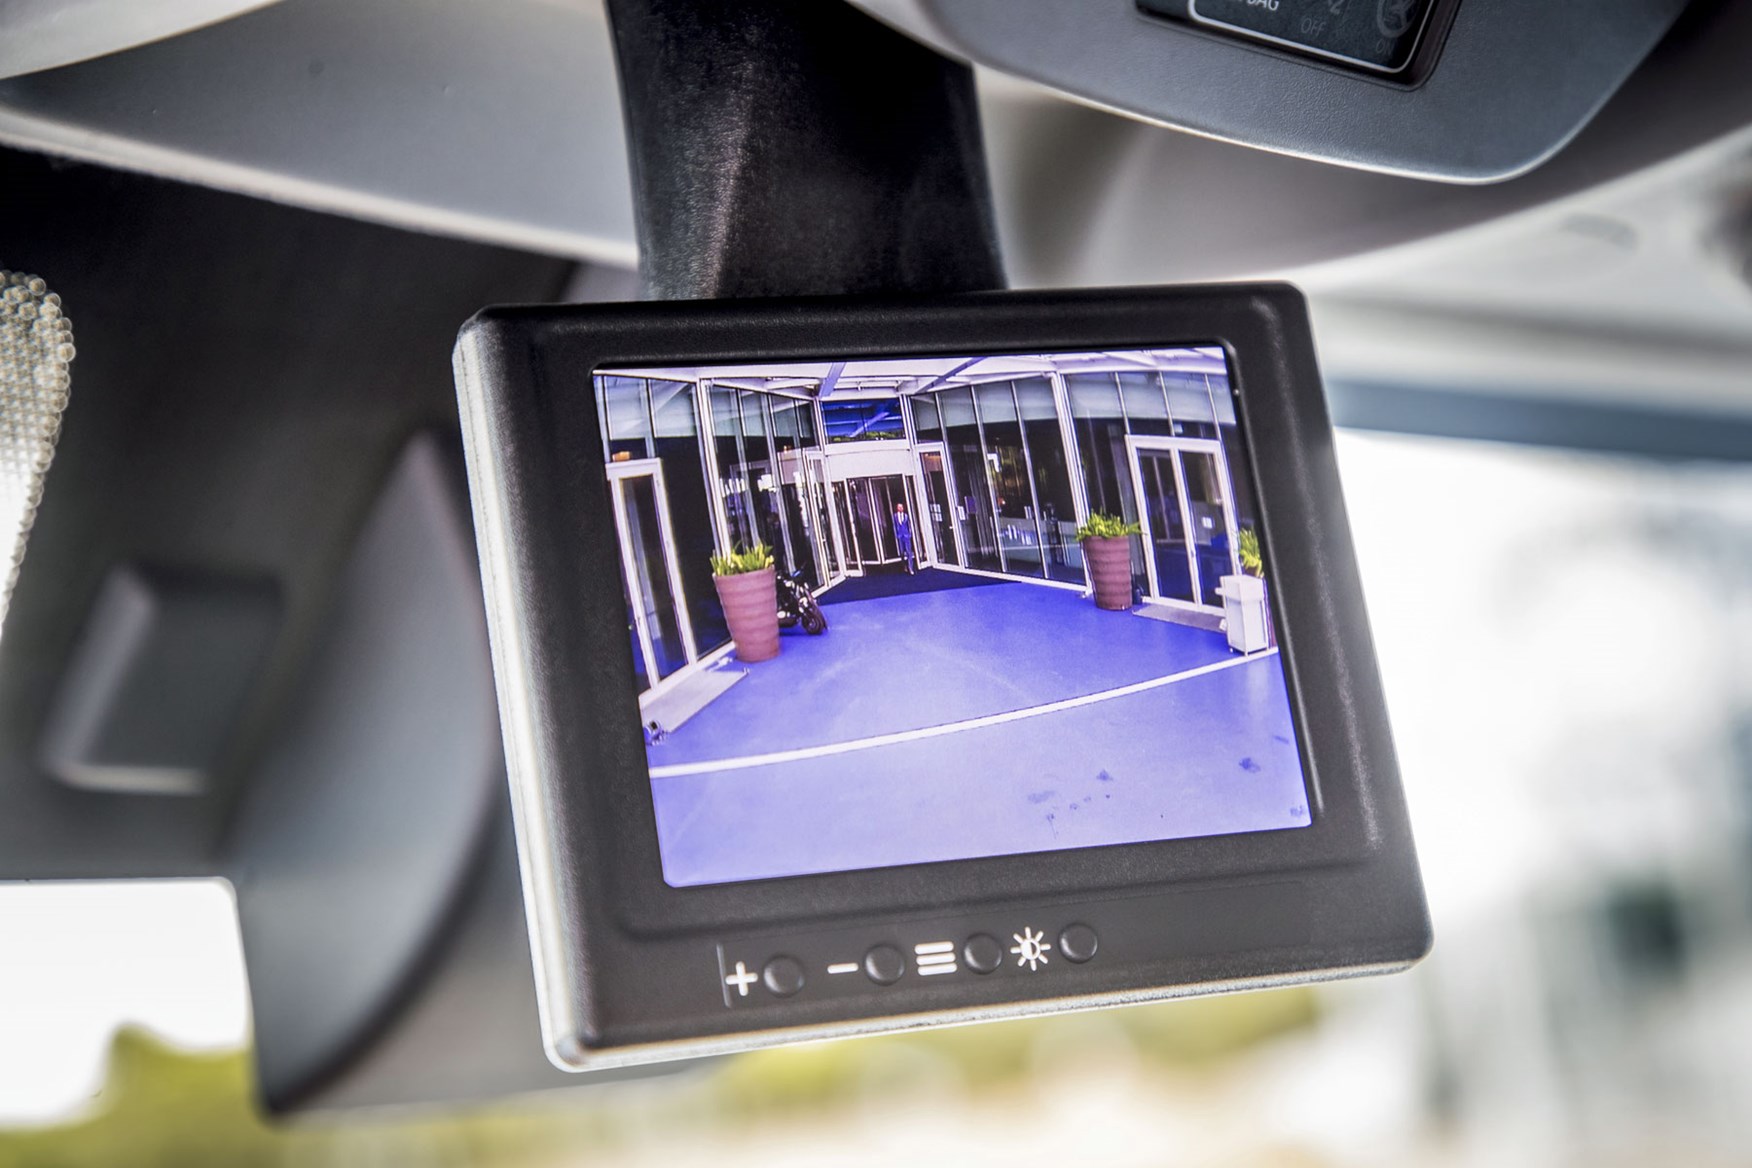 Renault Master review - 2019 facelift cab interior, showing rear view camera system